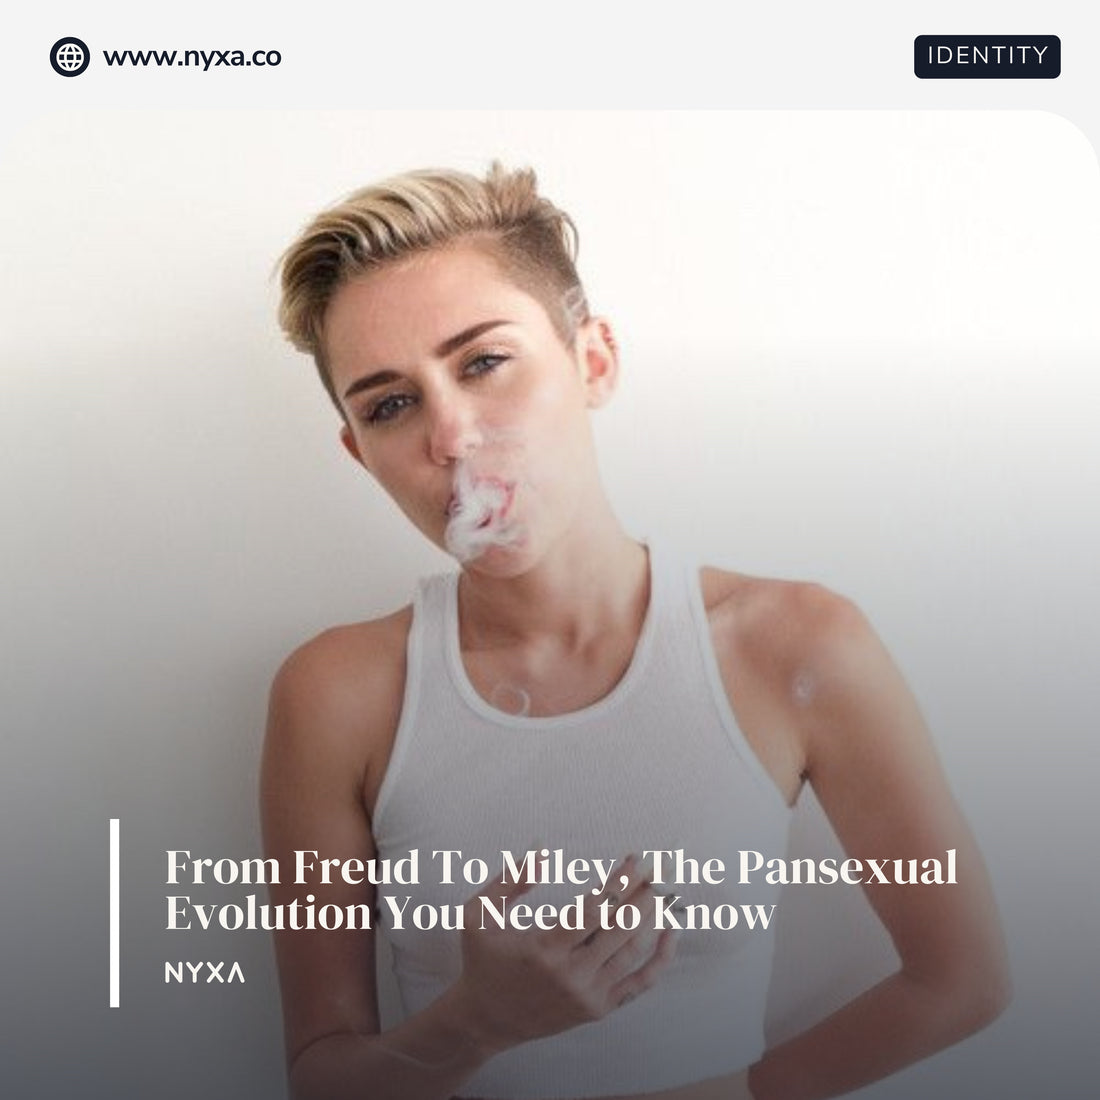 From Freud To Miley, The Pansexual Evolution You Need to Know